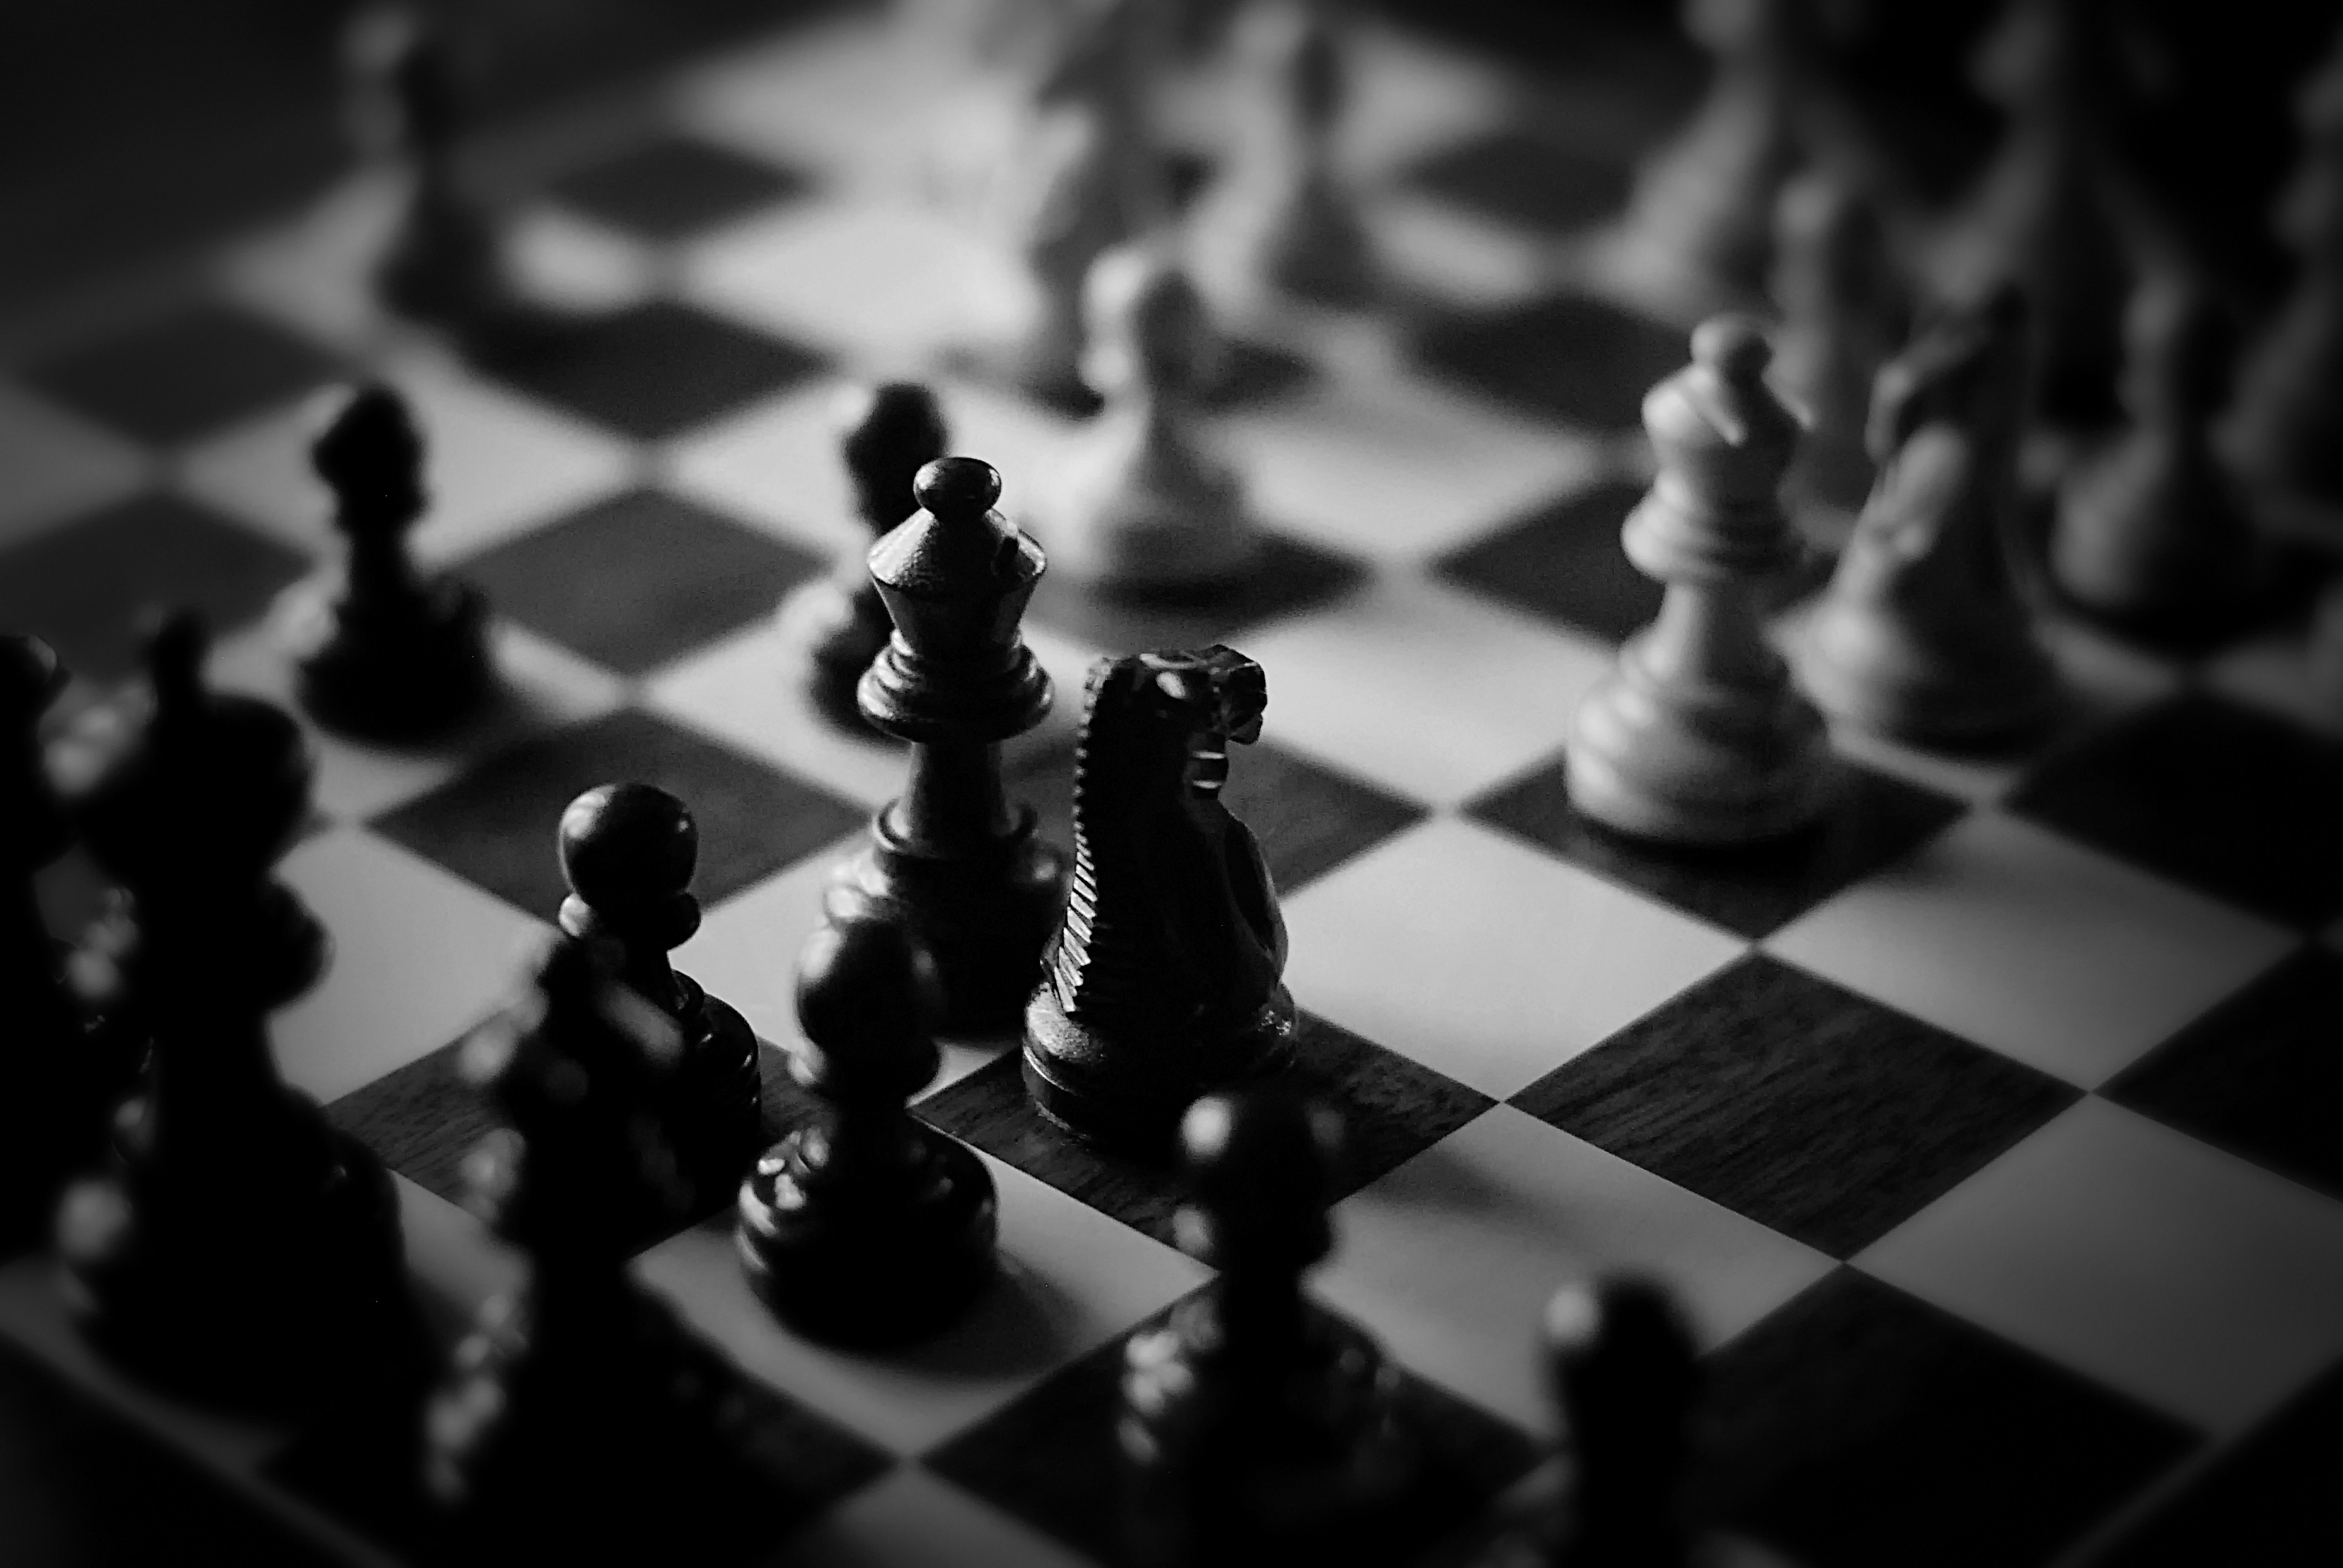 Game of chess in black and white (Getty Images)